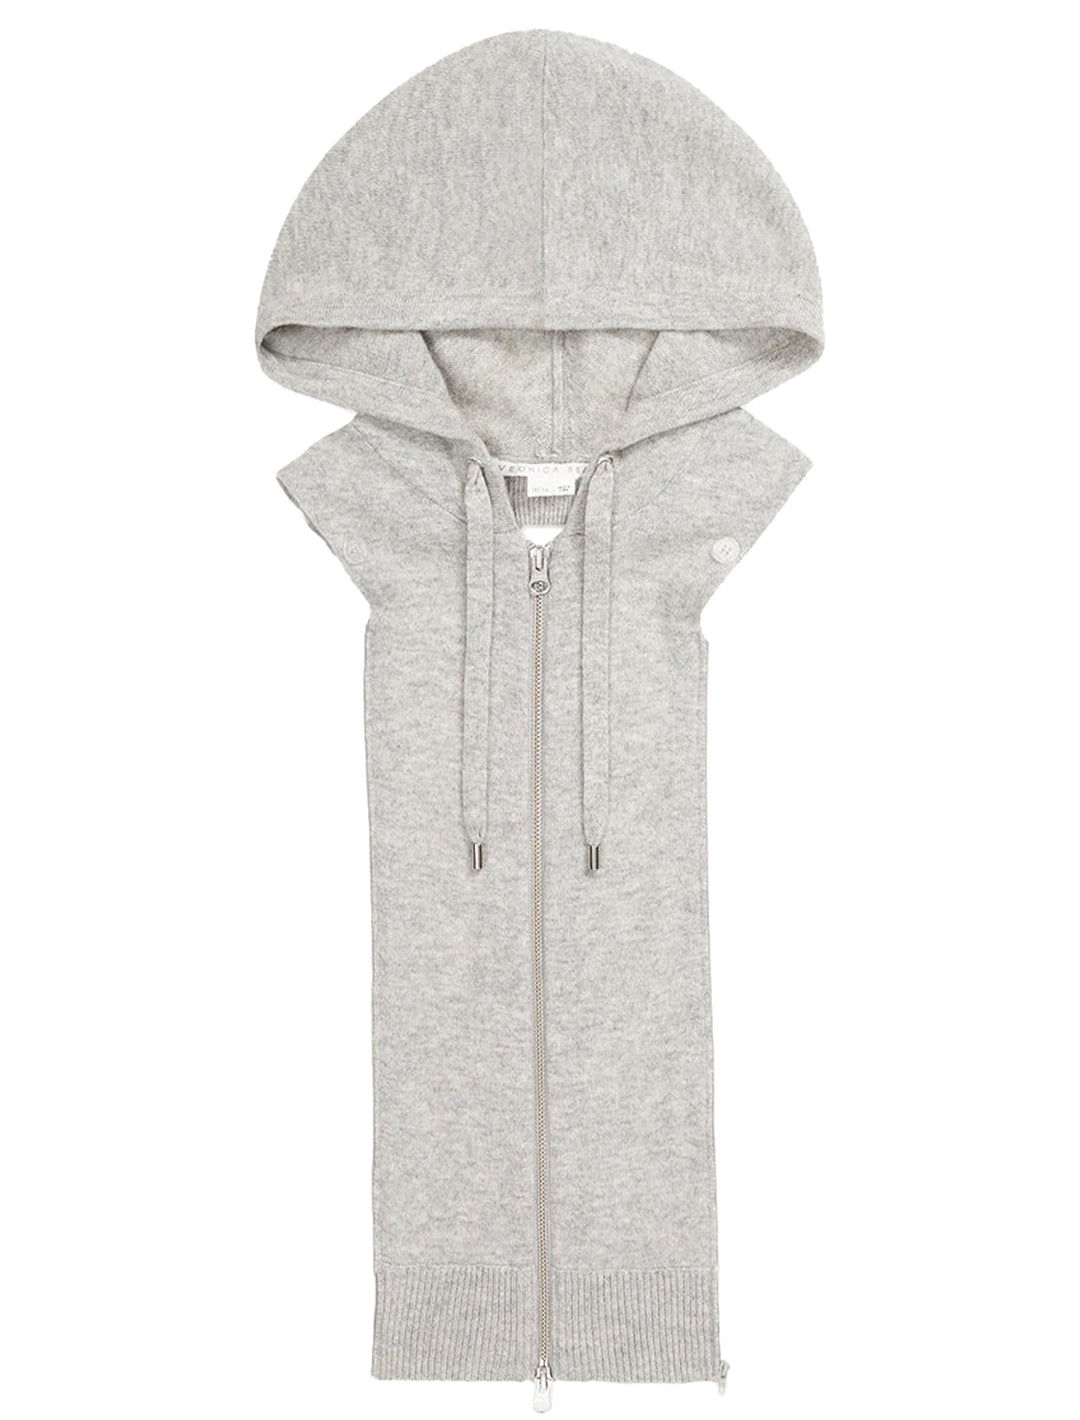 Front view of Veronica Beard's merino + cashmere hoodie dickey in grey.